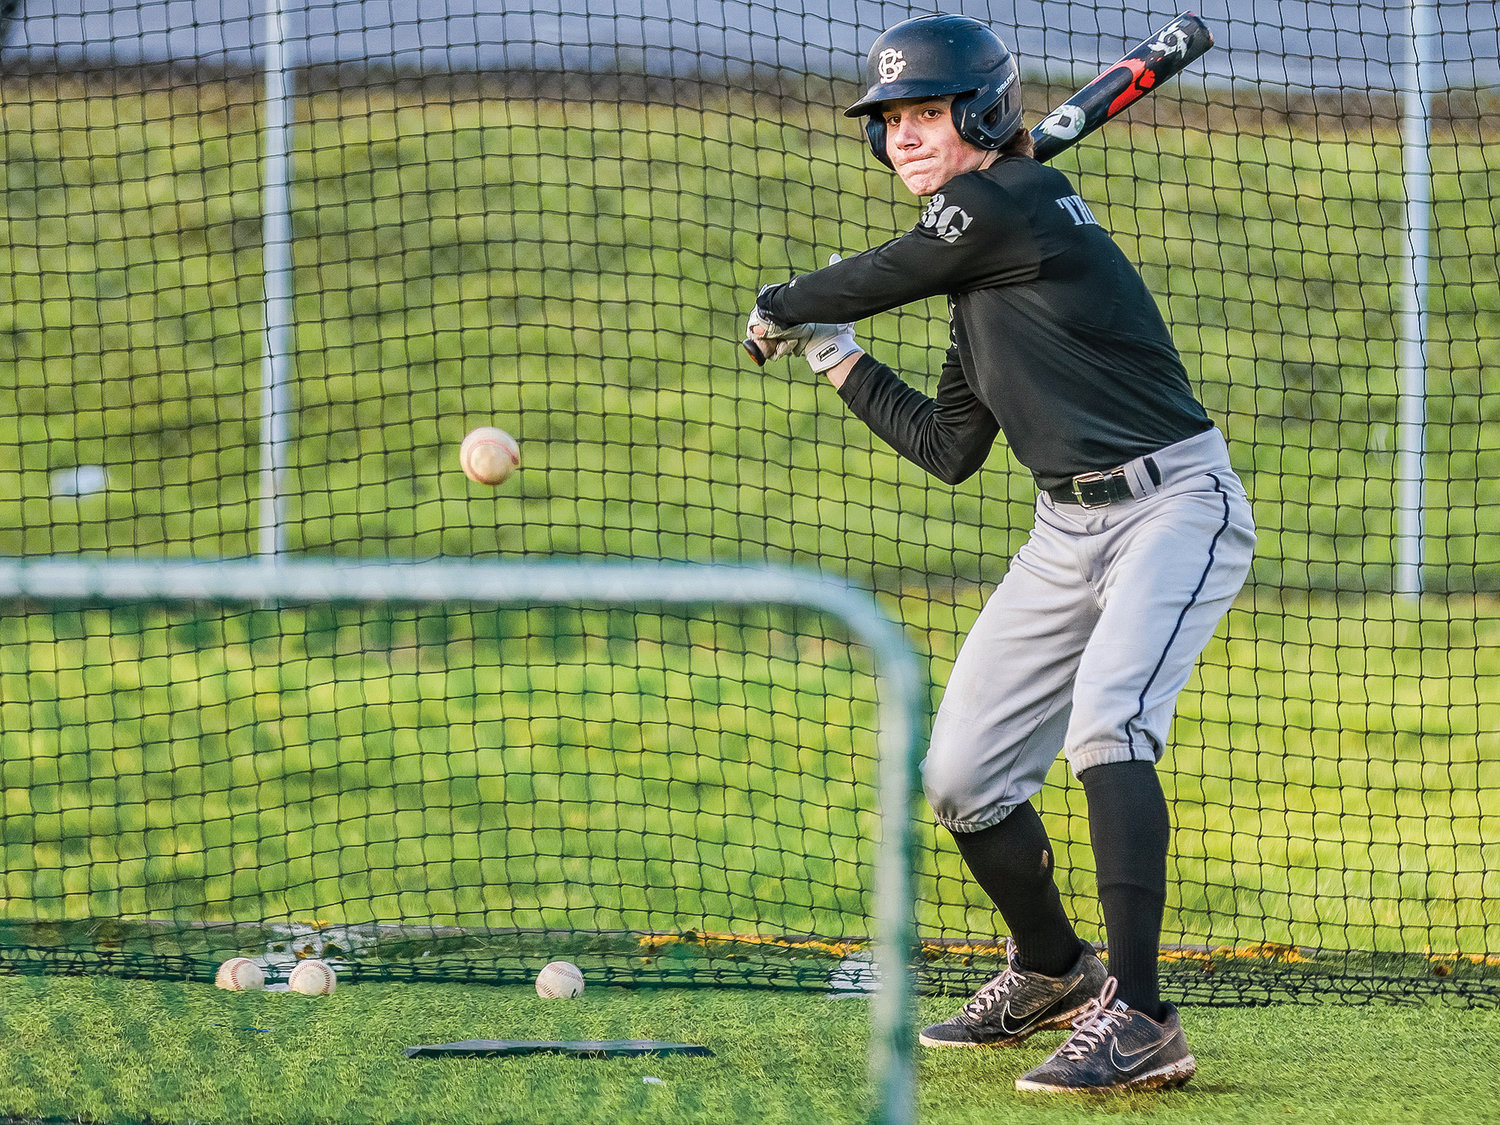 Peyton Sanders of the Tigers eyes up a baseball in the outdoor batting cages at the Battle Ground High School baseball fields on Wednesday, March 8.